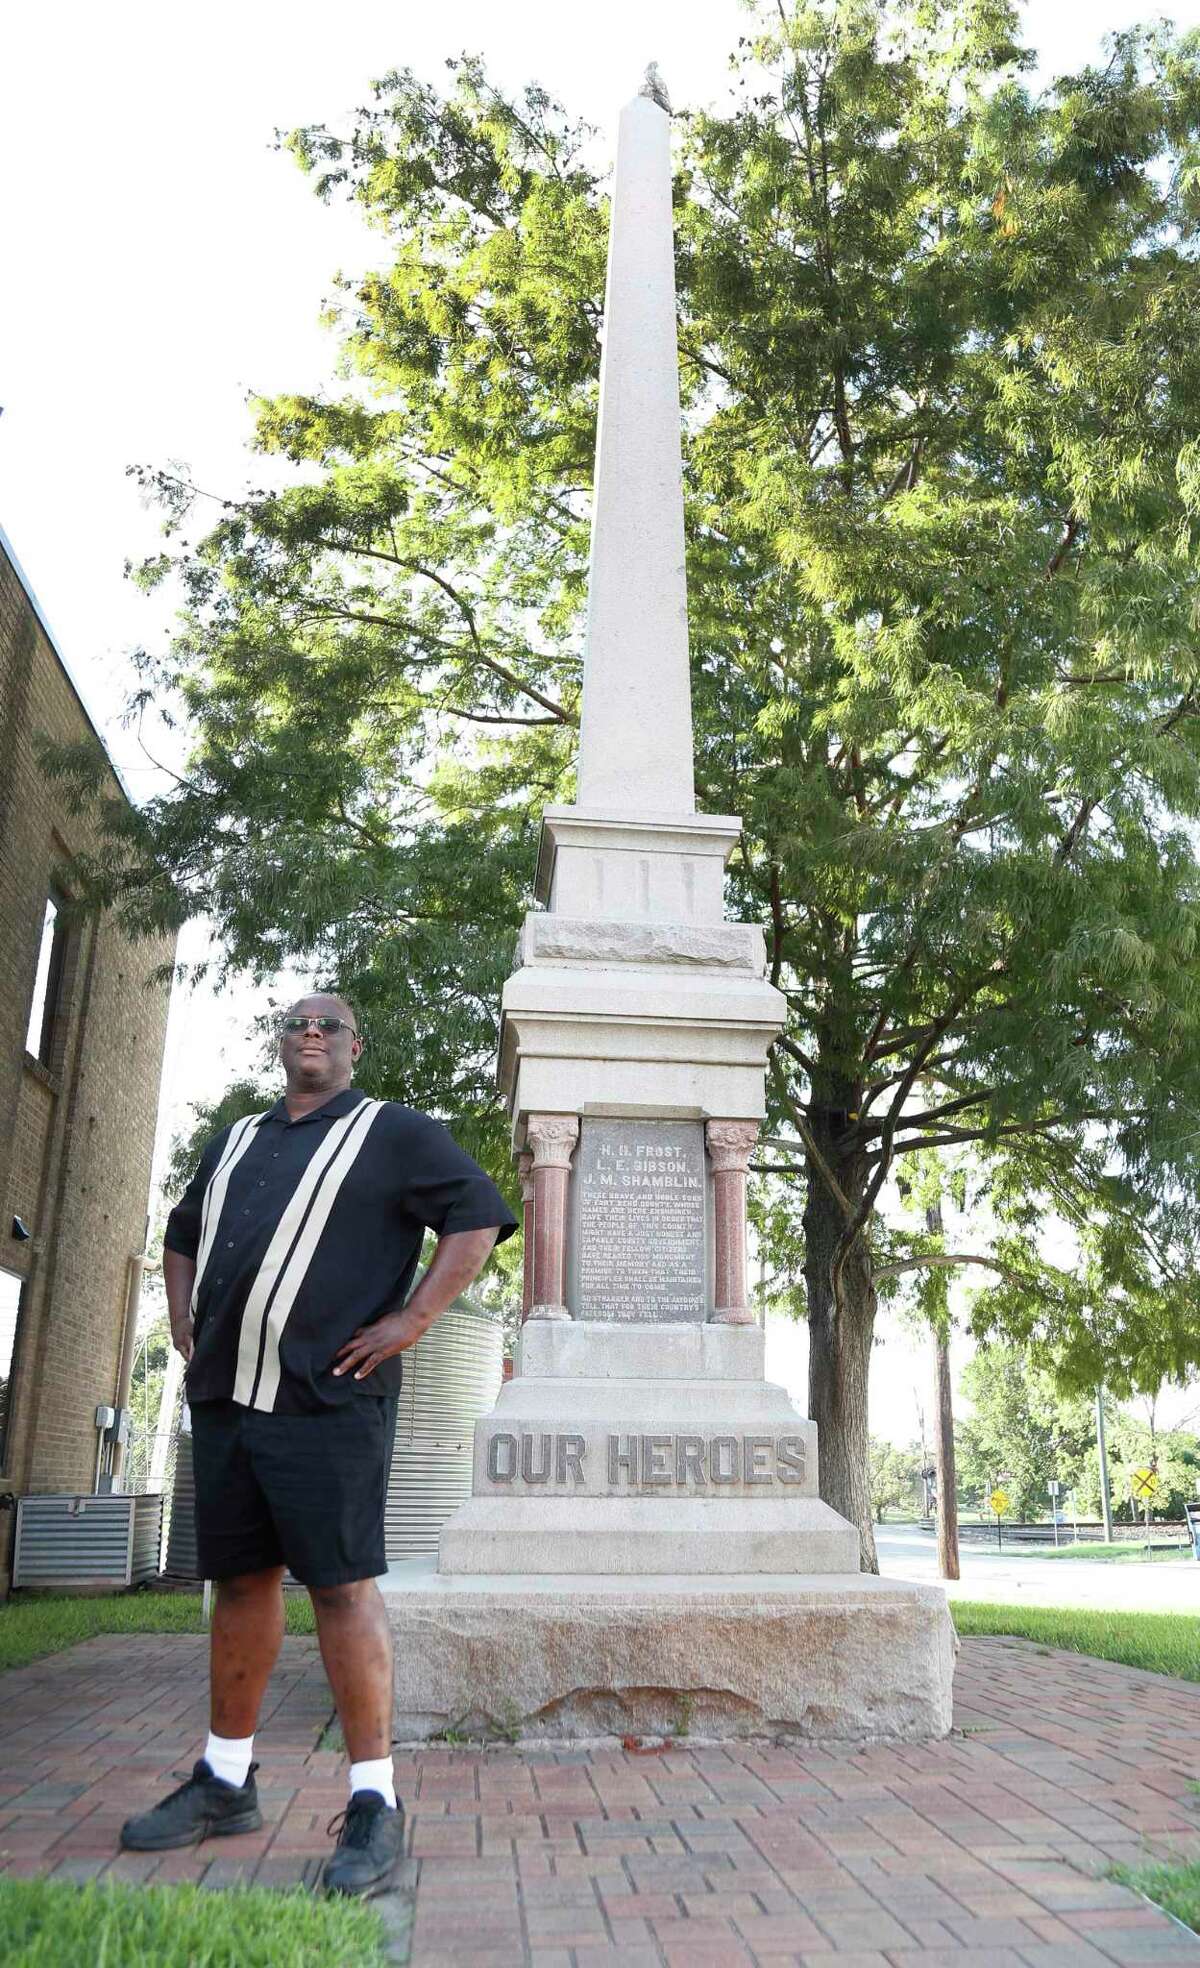 Tres Davis, a Richmond resident, is trying to assert ownership of a monument that sits near Richmond City Hall, Thursday, August 6, 2020, in Richmond. Over the summer, community members have asked for the monument to be removed, but right now it's fate is in limbo. Davis wants to take over ownership of the monument and move it to a museum. The monument pays homage to The Jaybirds, a white political group from the late 19th century. They permitted only white men to run for local political office.